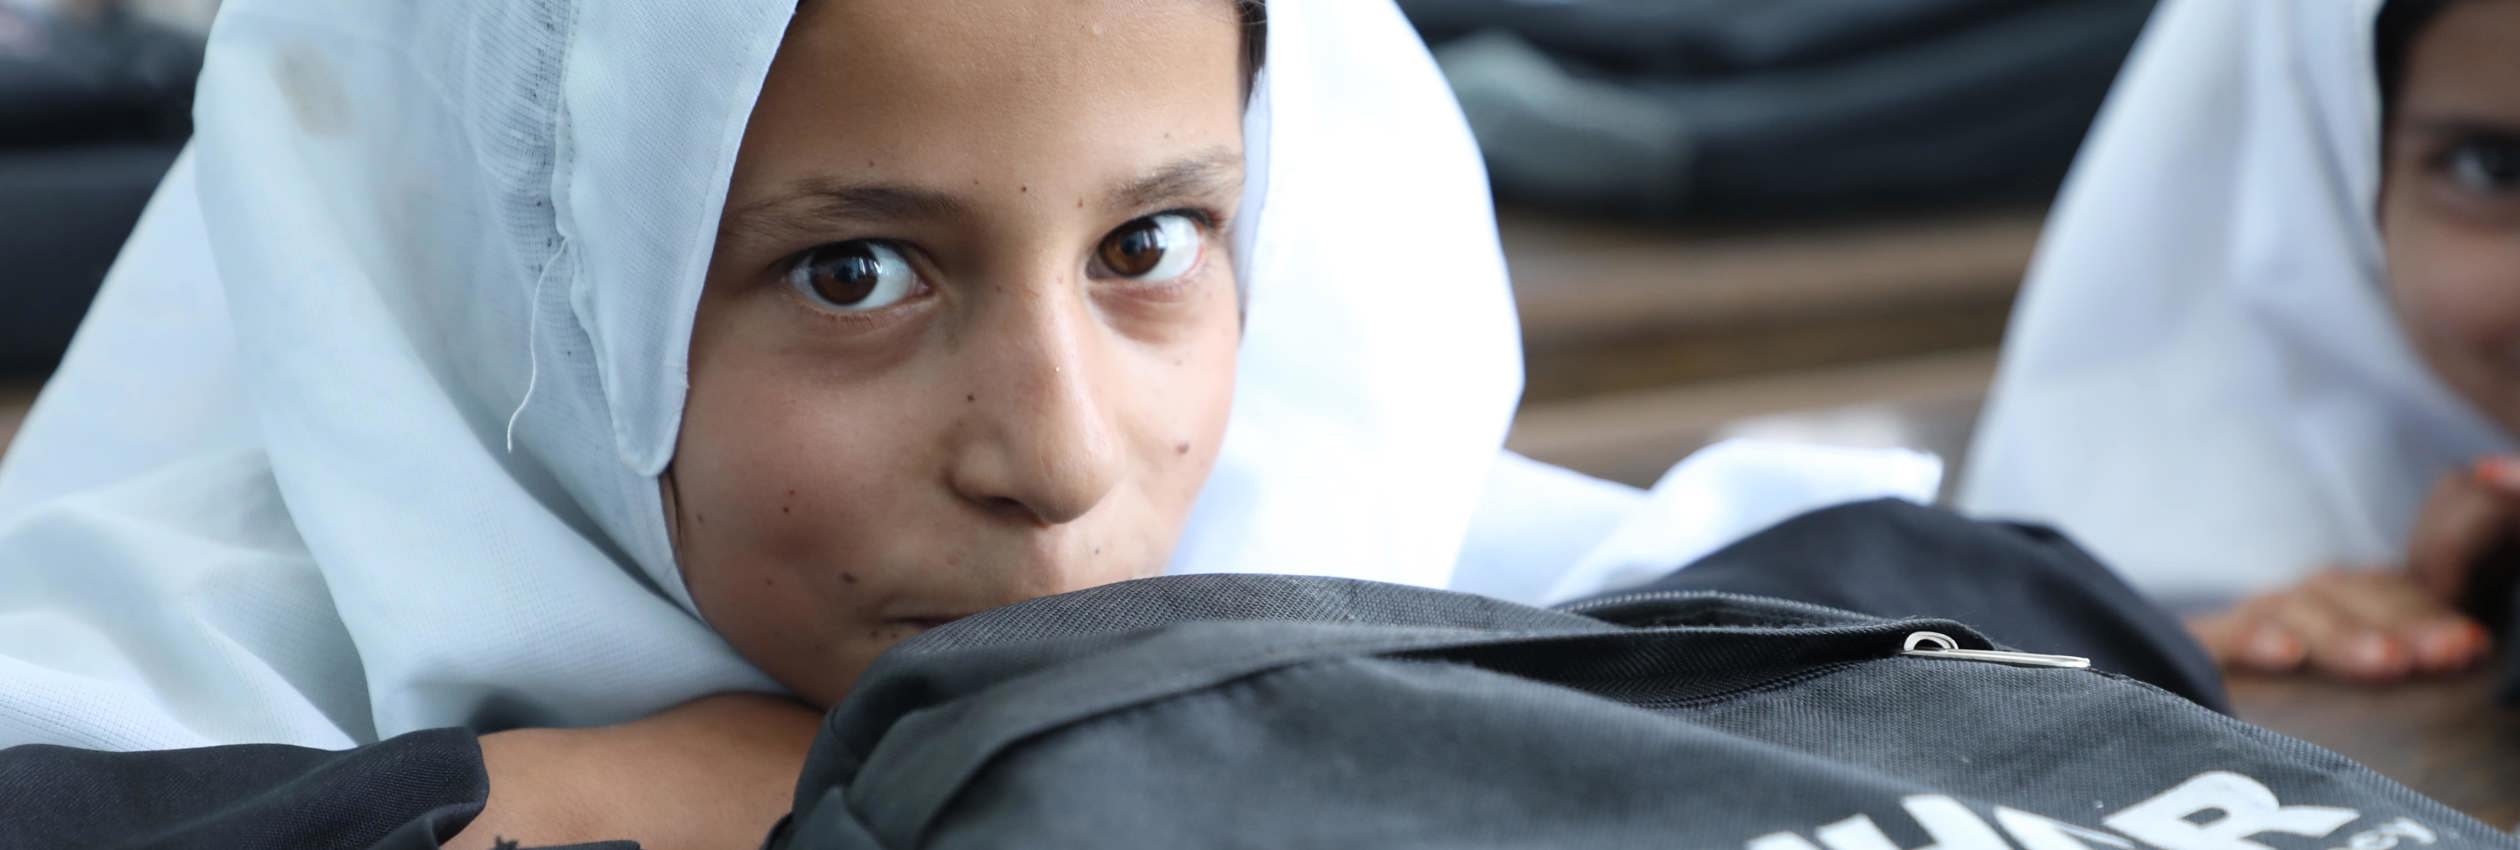 A student attends Kahdistan Primary School. The UNHCR-built school supports hundreds of girls from families who are internally displaced and refugee returnees in Herat Province. 